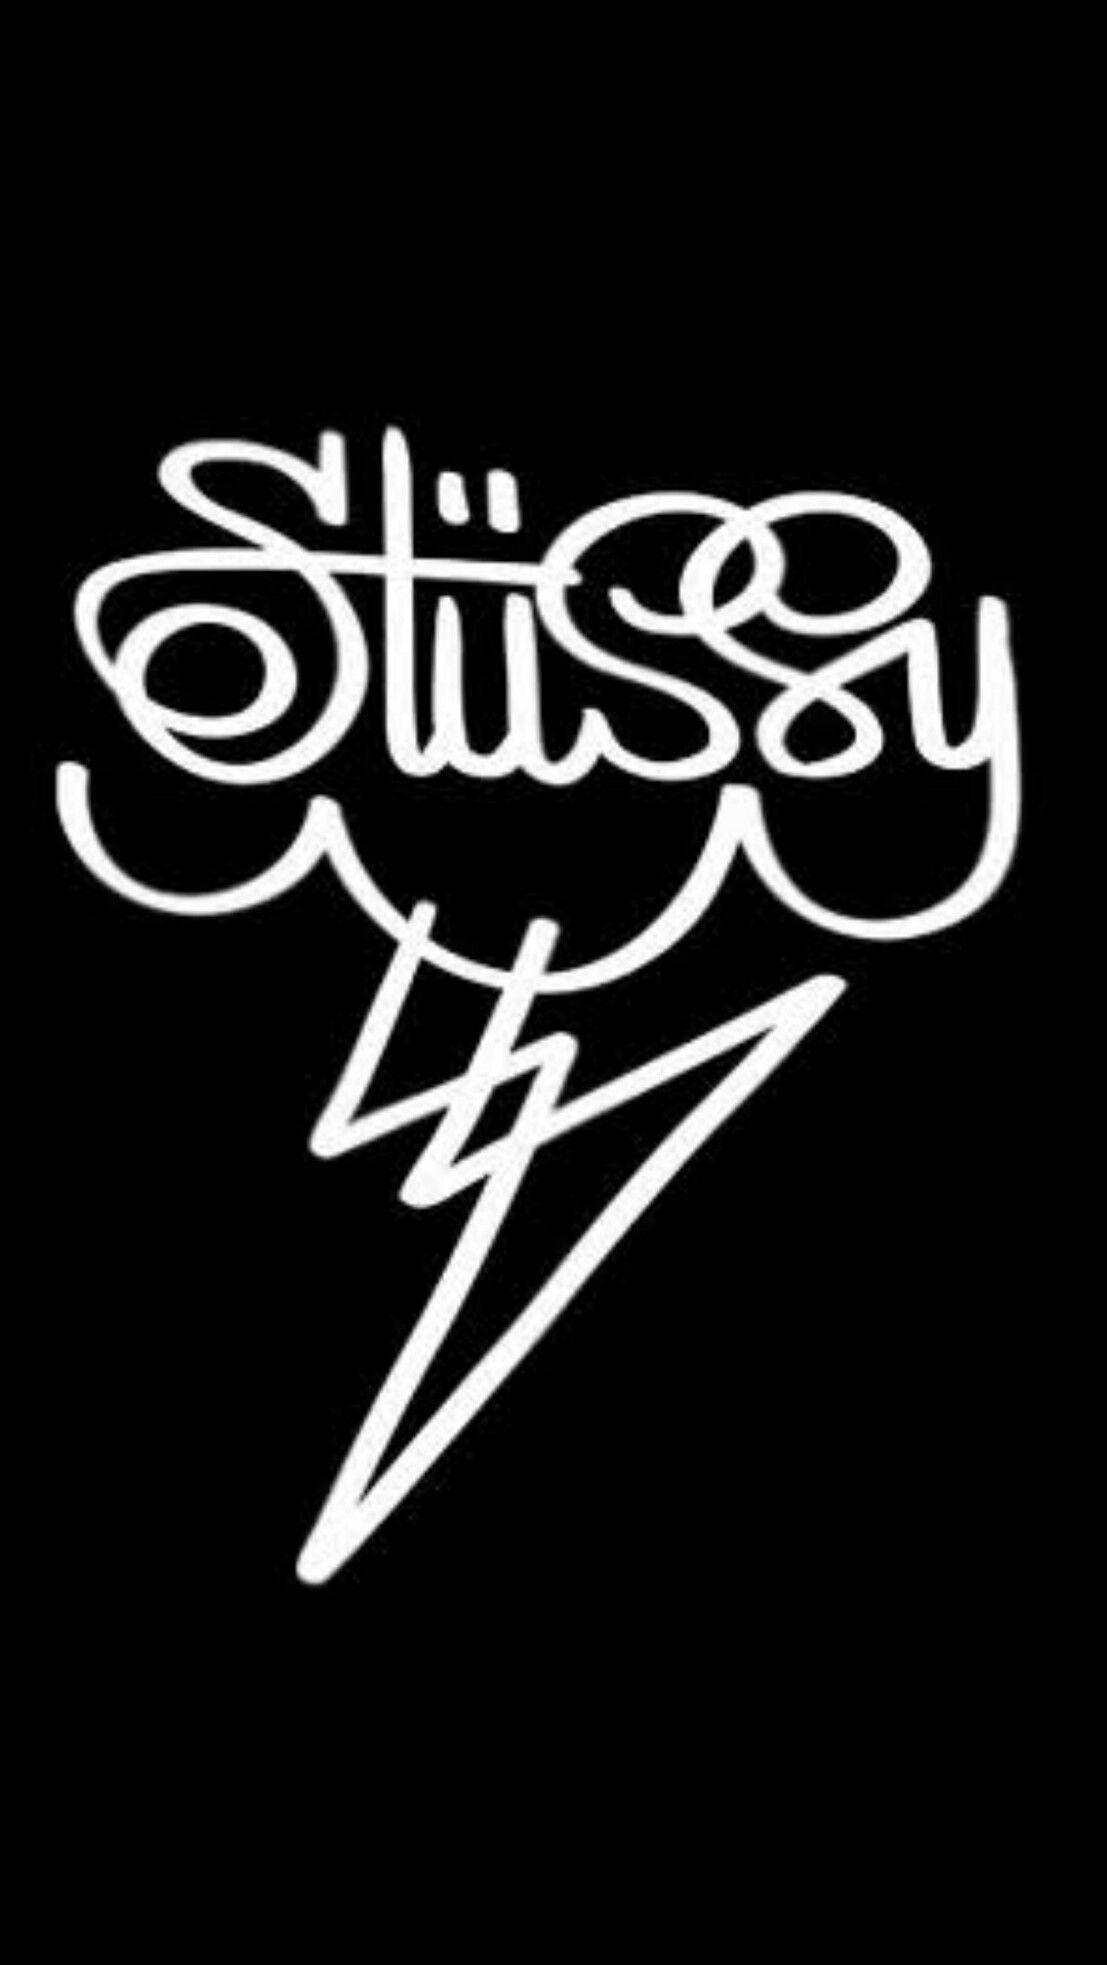 samsung #edge #s6 #stussy #black #wallpaper #android #iphone